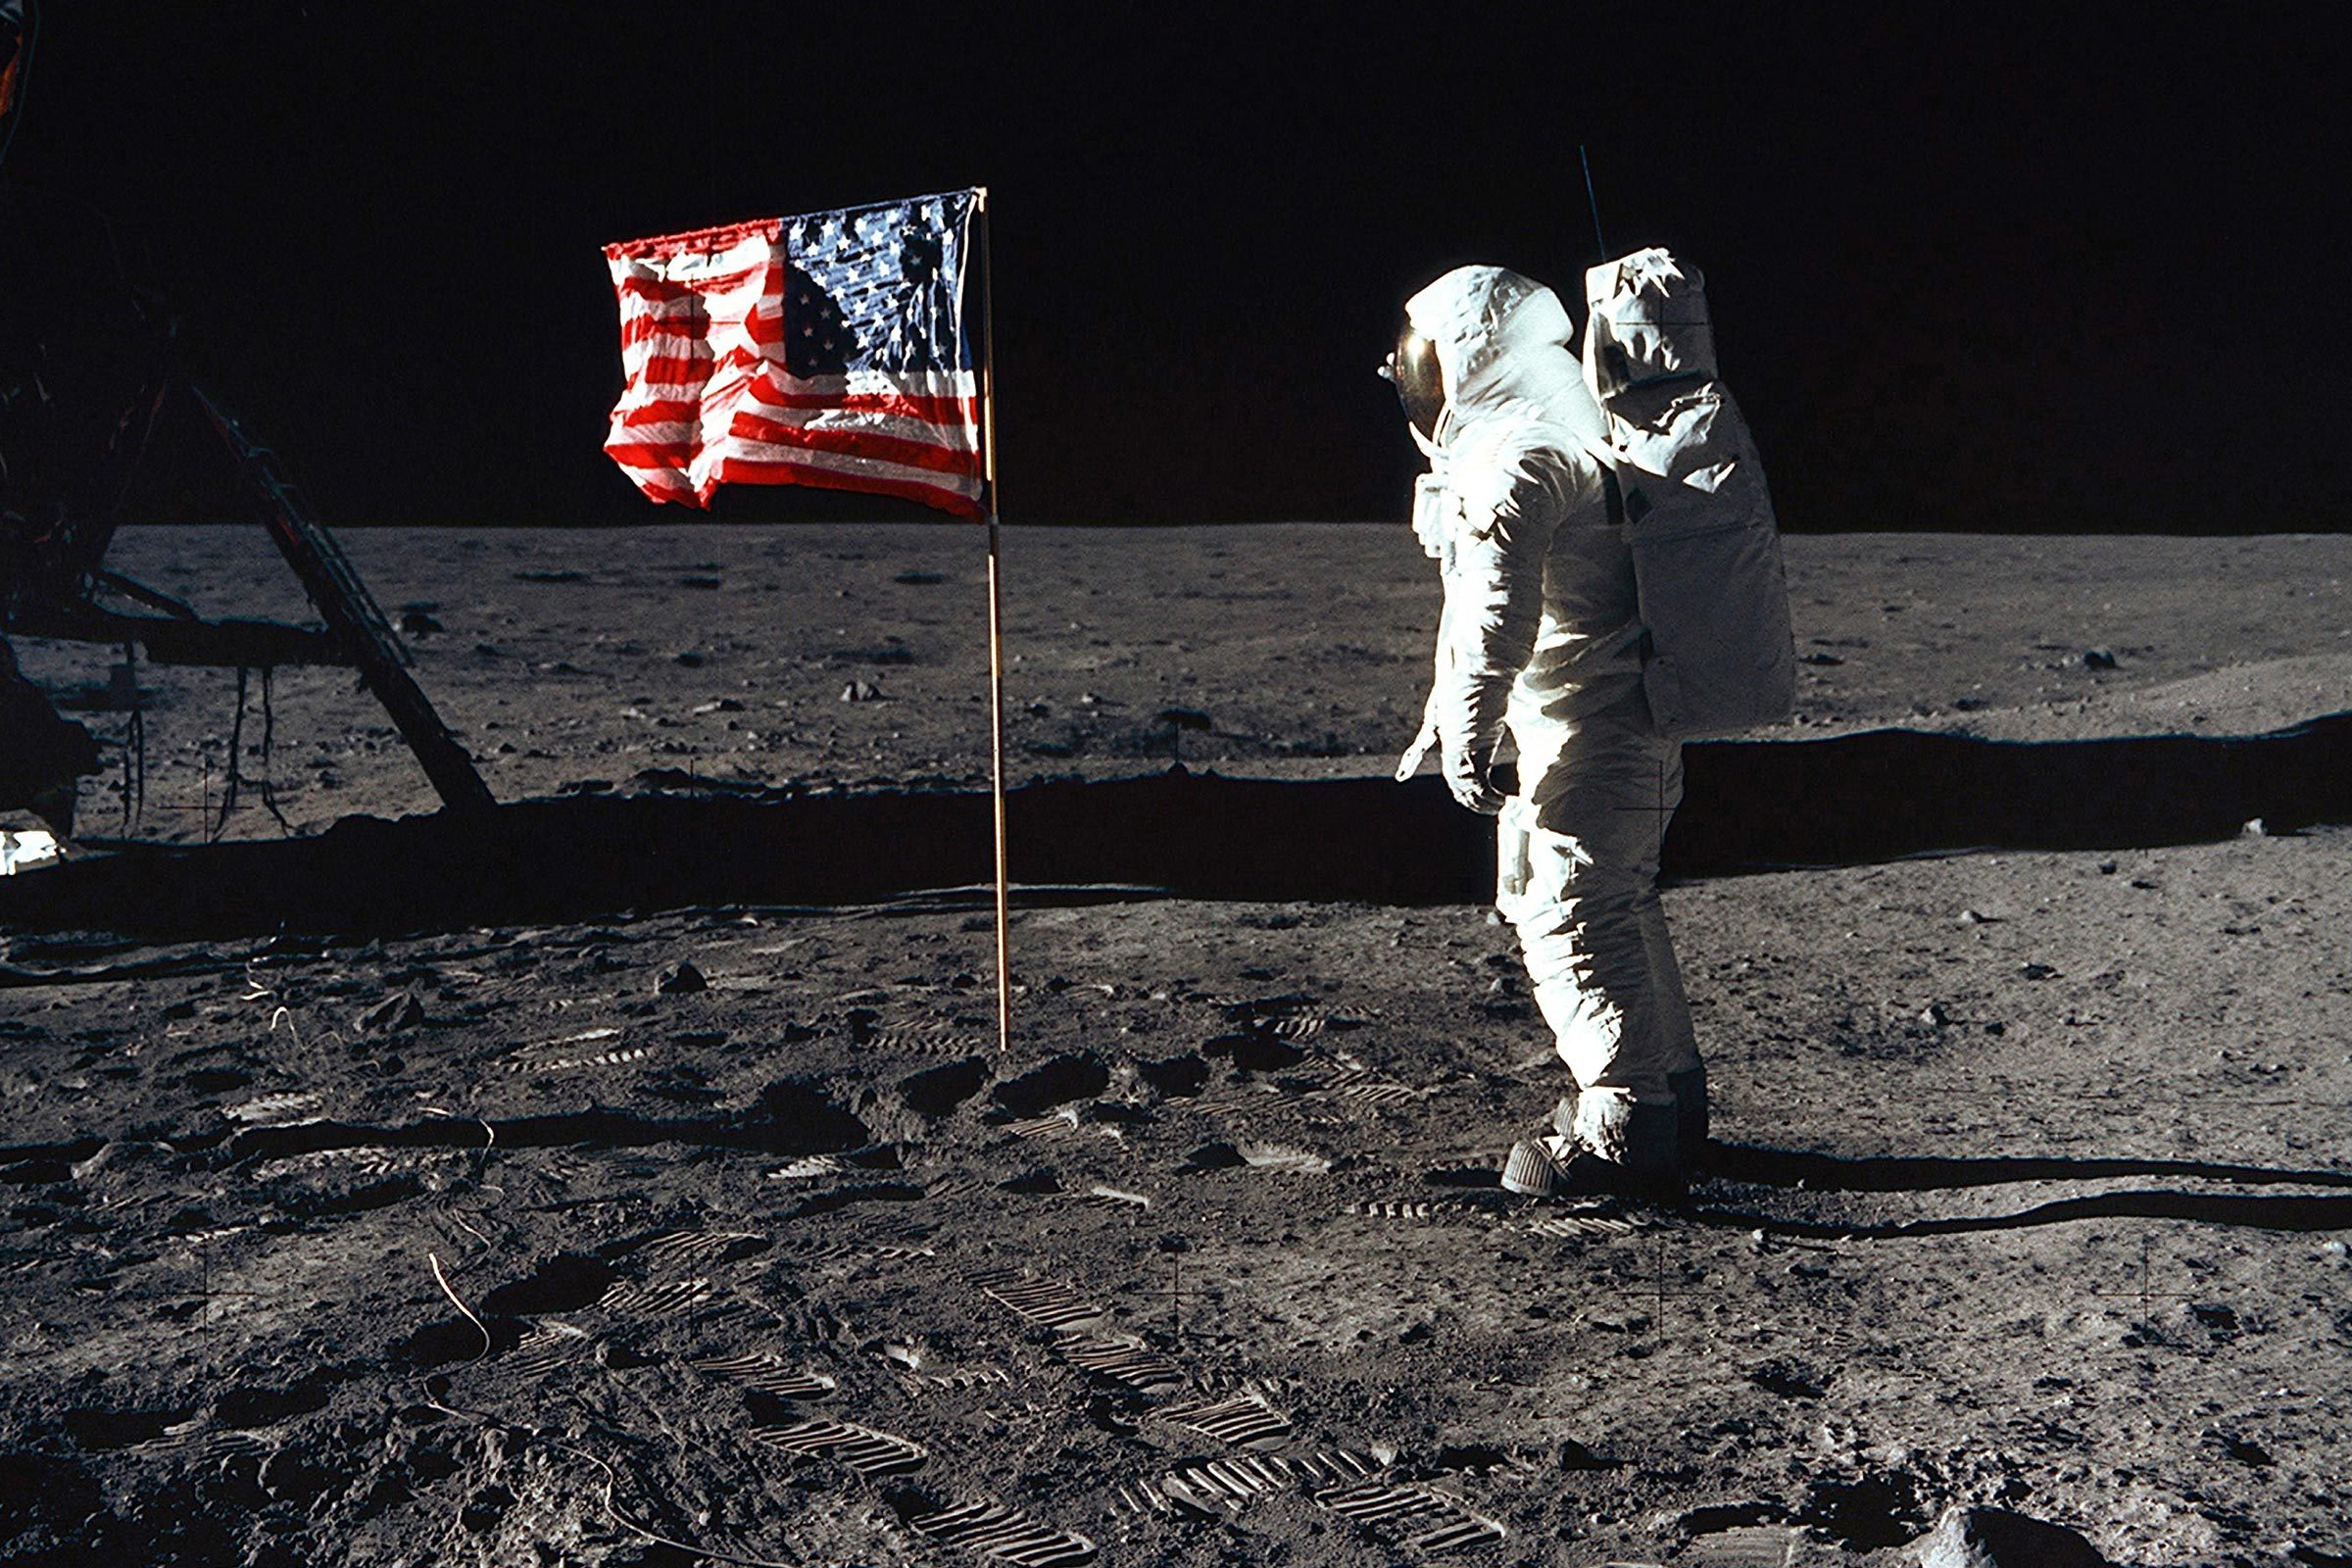 Astronaut Edwin 'Buzz' Aldrin, lunar module pilot of the first lunar landing mission, poses for a photograph beside the U.S. flag during the Apollo 11 mission